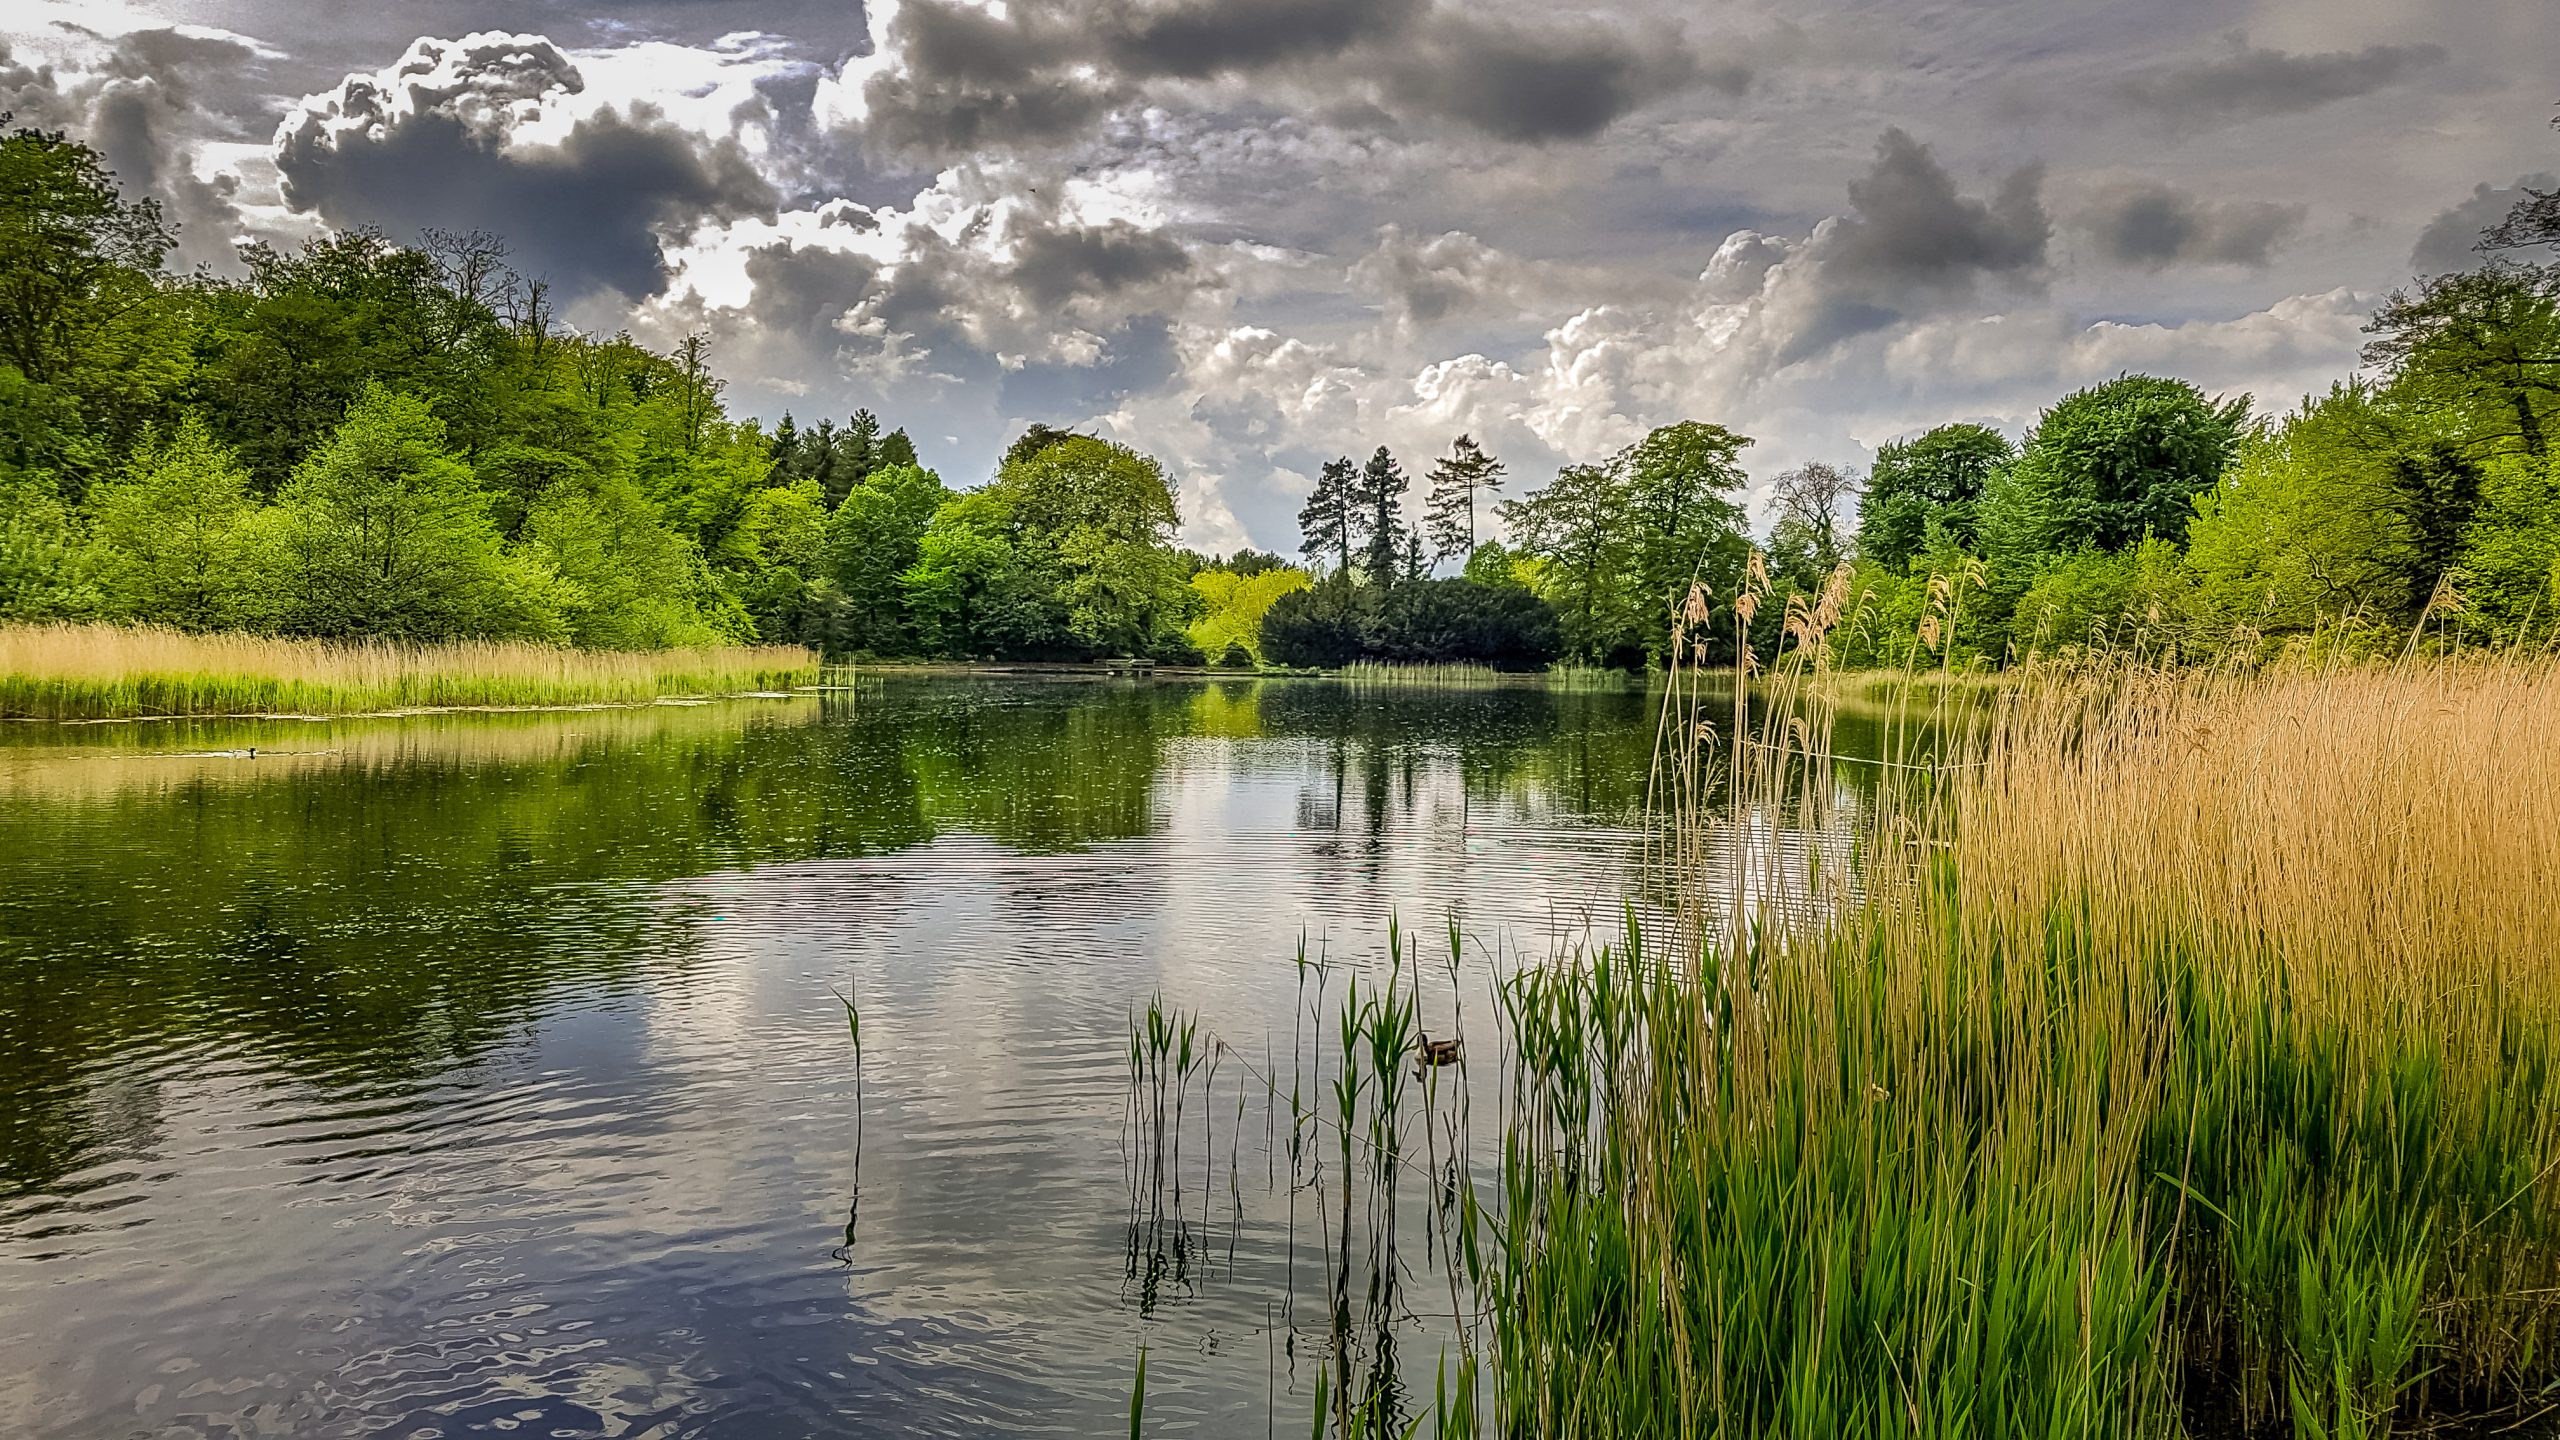 View across the lake at Stanton Country park near Swindon, Wiltshire